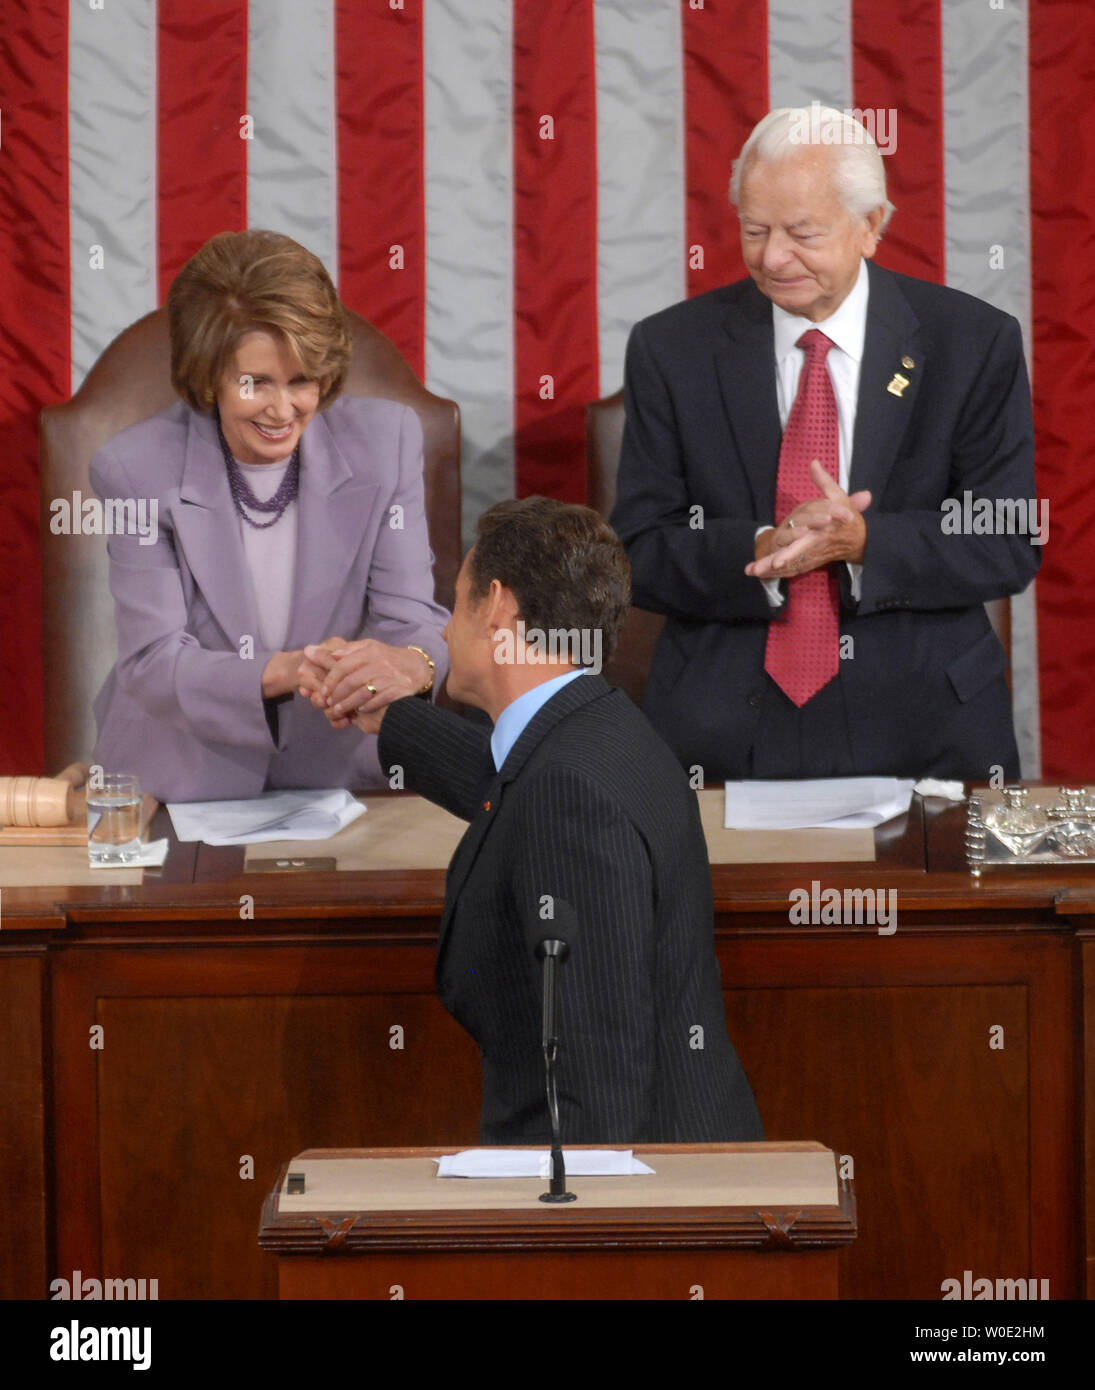 French President Nicolas Sarkozy shakes hands with Speaker of the House Nancy Pelosi while Senate President Pro Tempore Robert Byrd (D-WV) watches on following his address to a joint meeting of Congress at the Capitol Building in Washington on November 7, 2007. (UPI Photo/Kevin Dietsch) Stock Photo